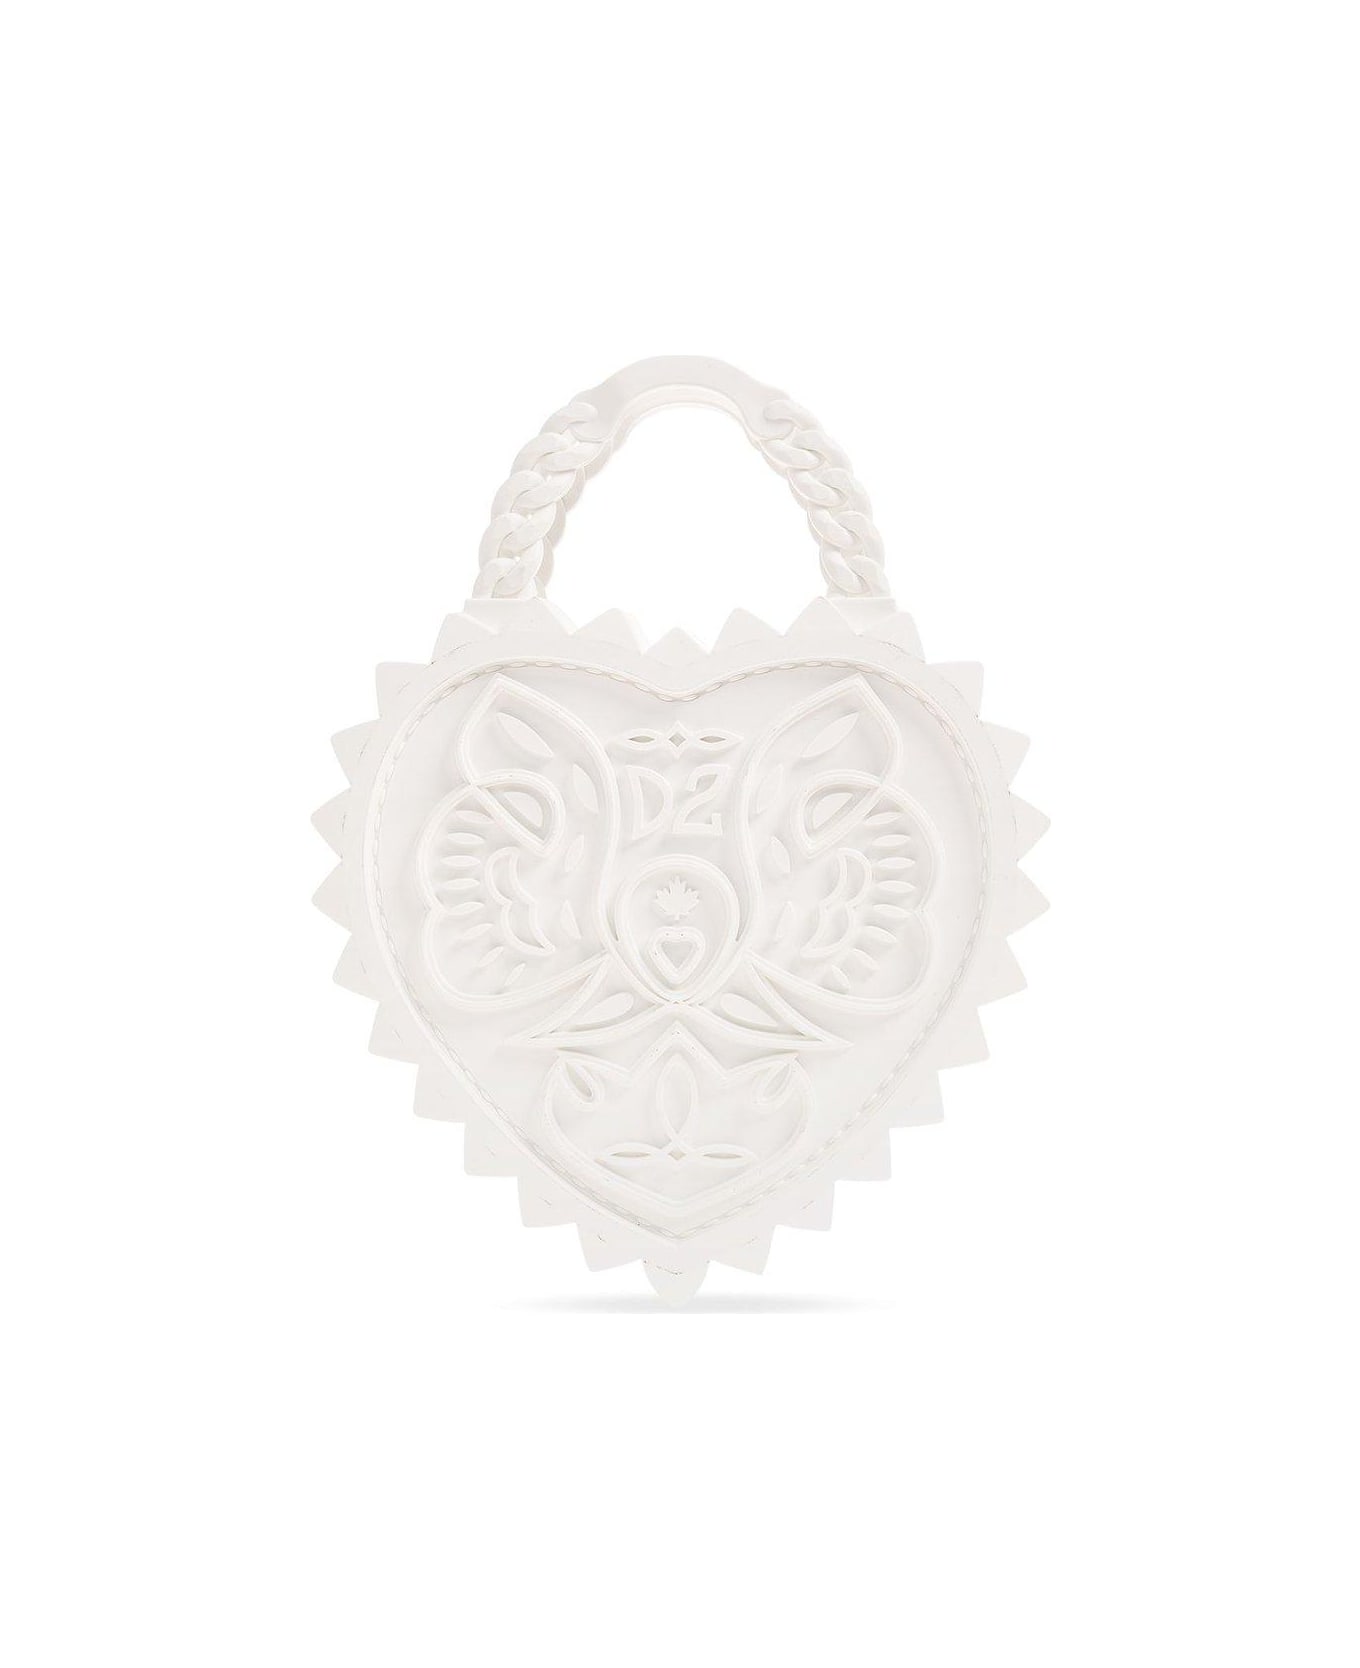 Dsquared2 Open Your Heart Top Handle Bag - Bianco トートバッグ